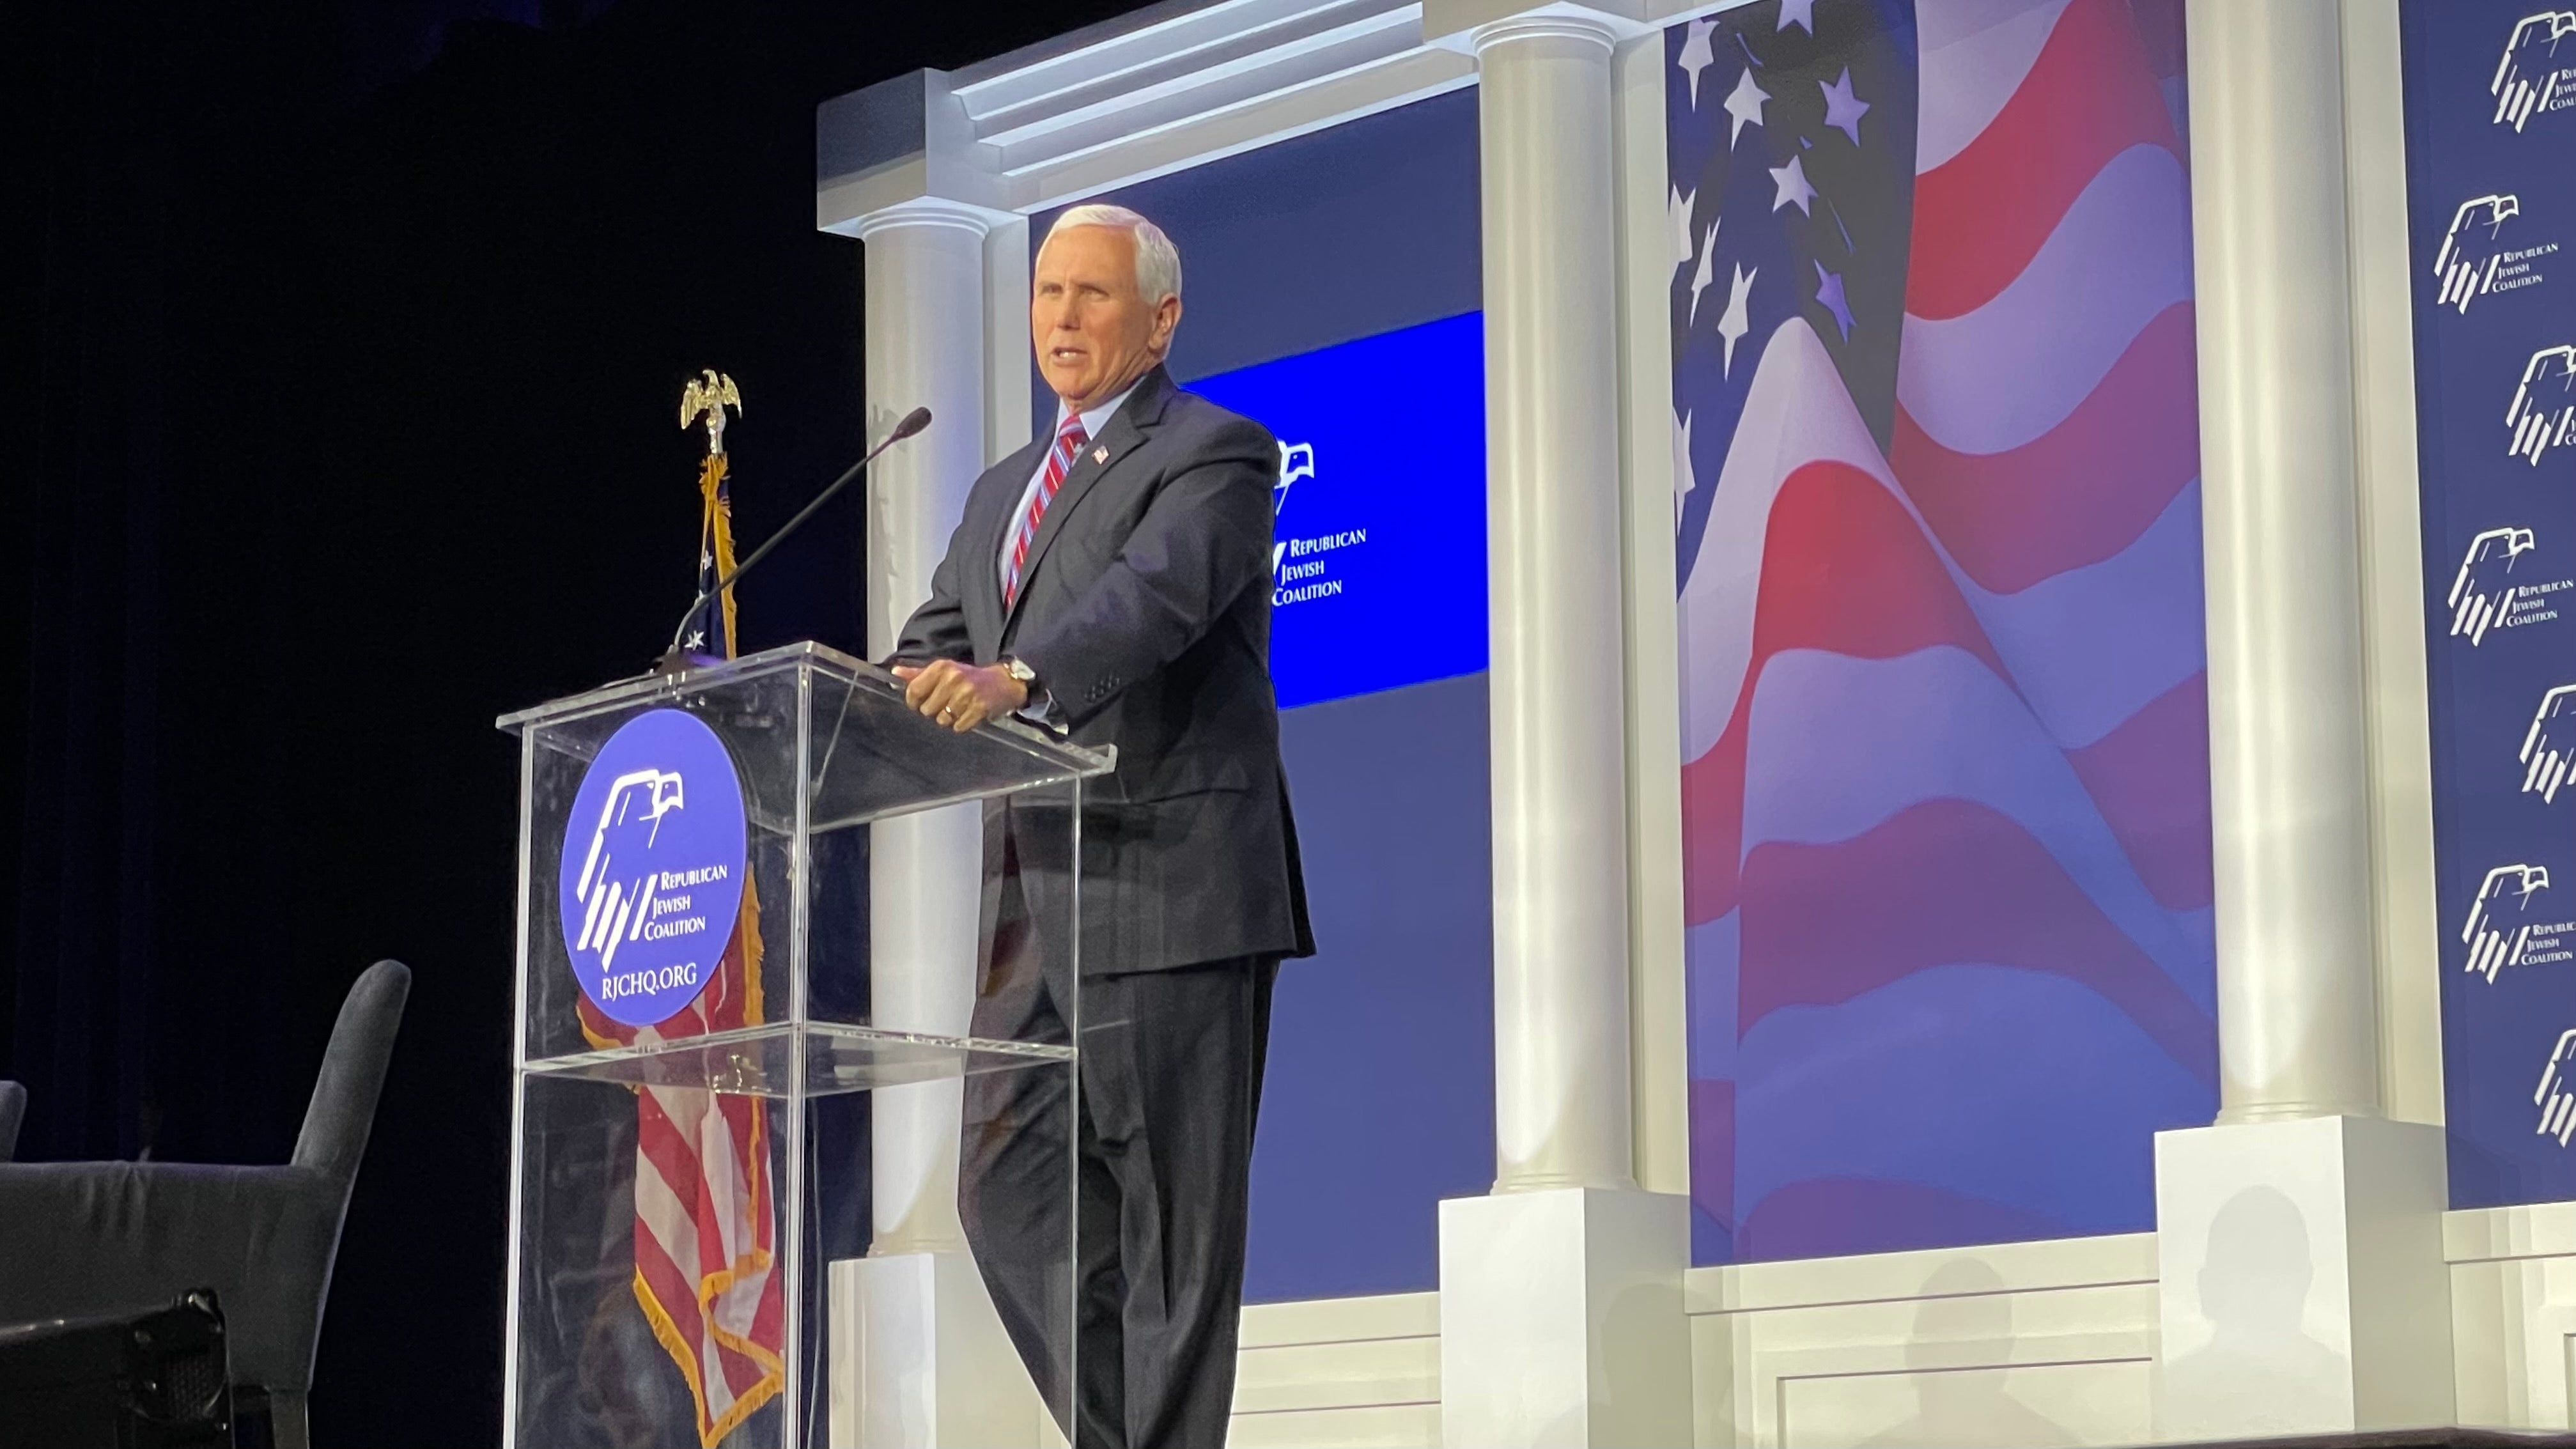 Biden has 'turned his back on Israel,' Mike Pence tells Republican Jewish Coalition